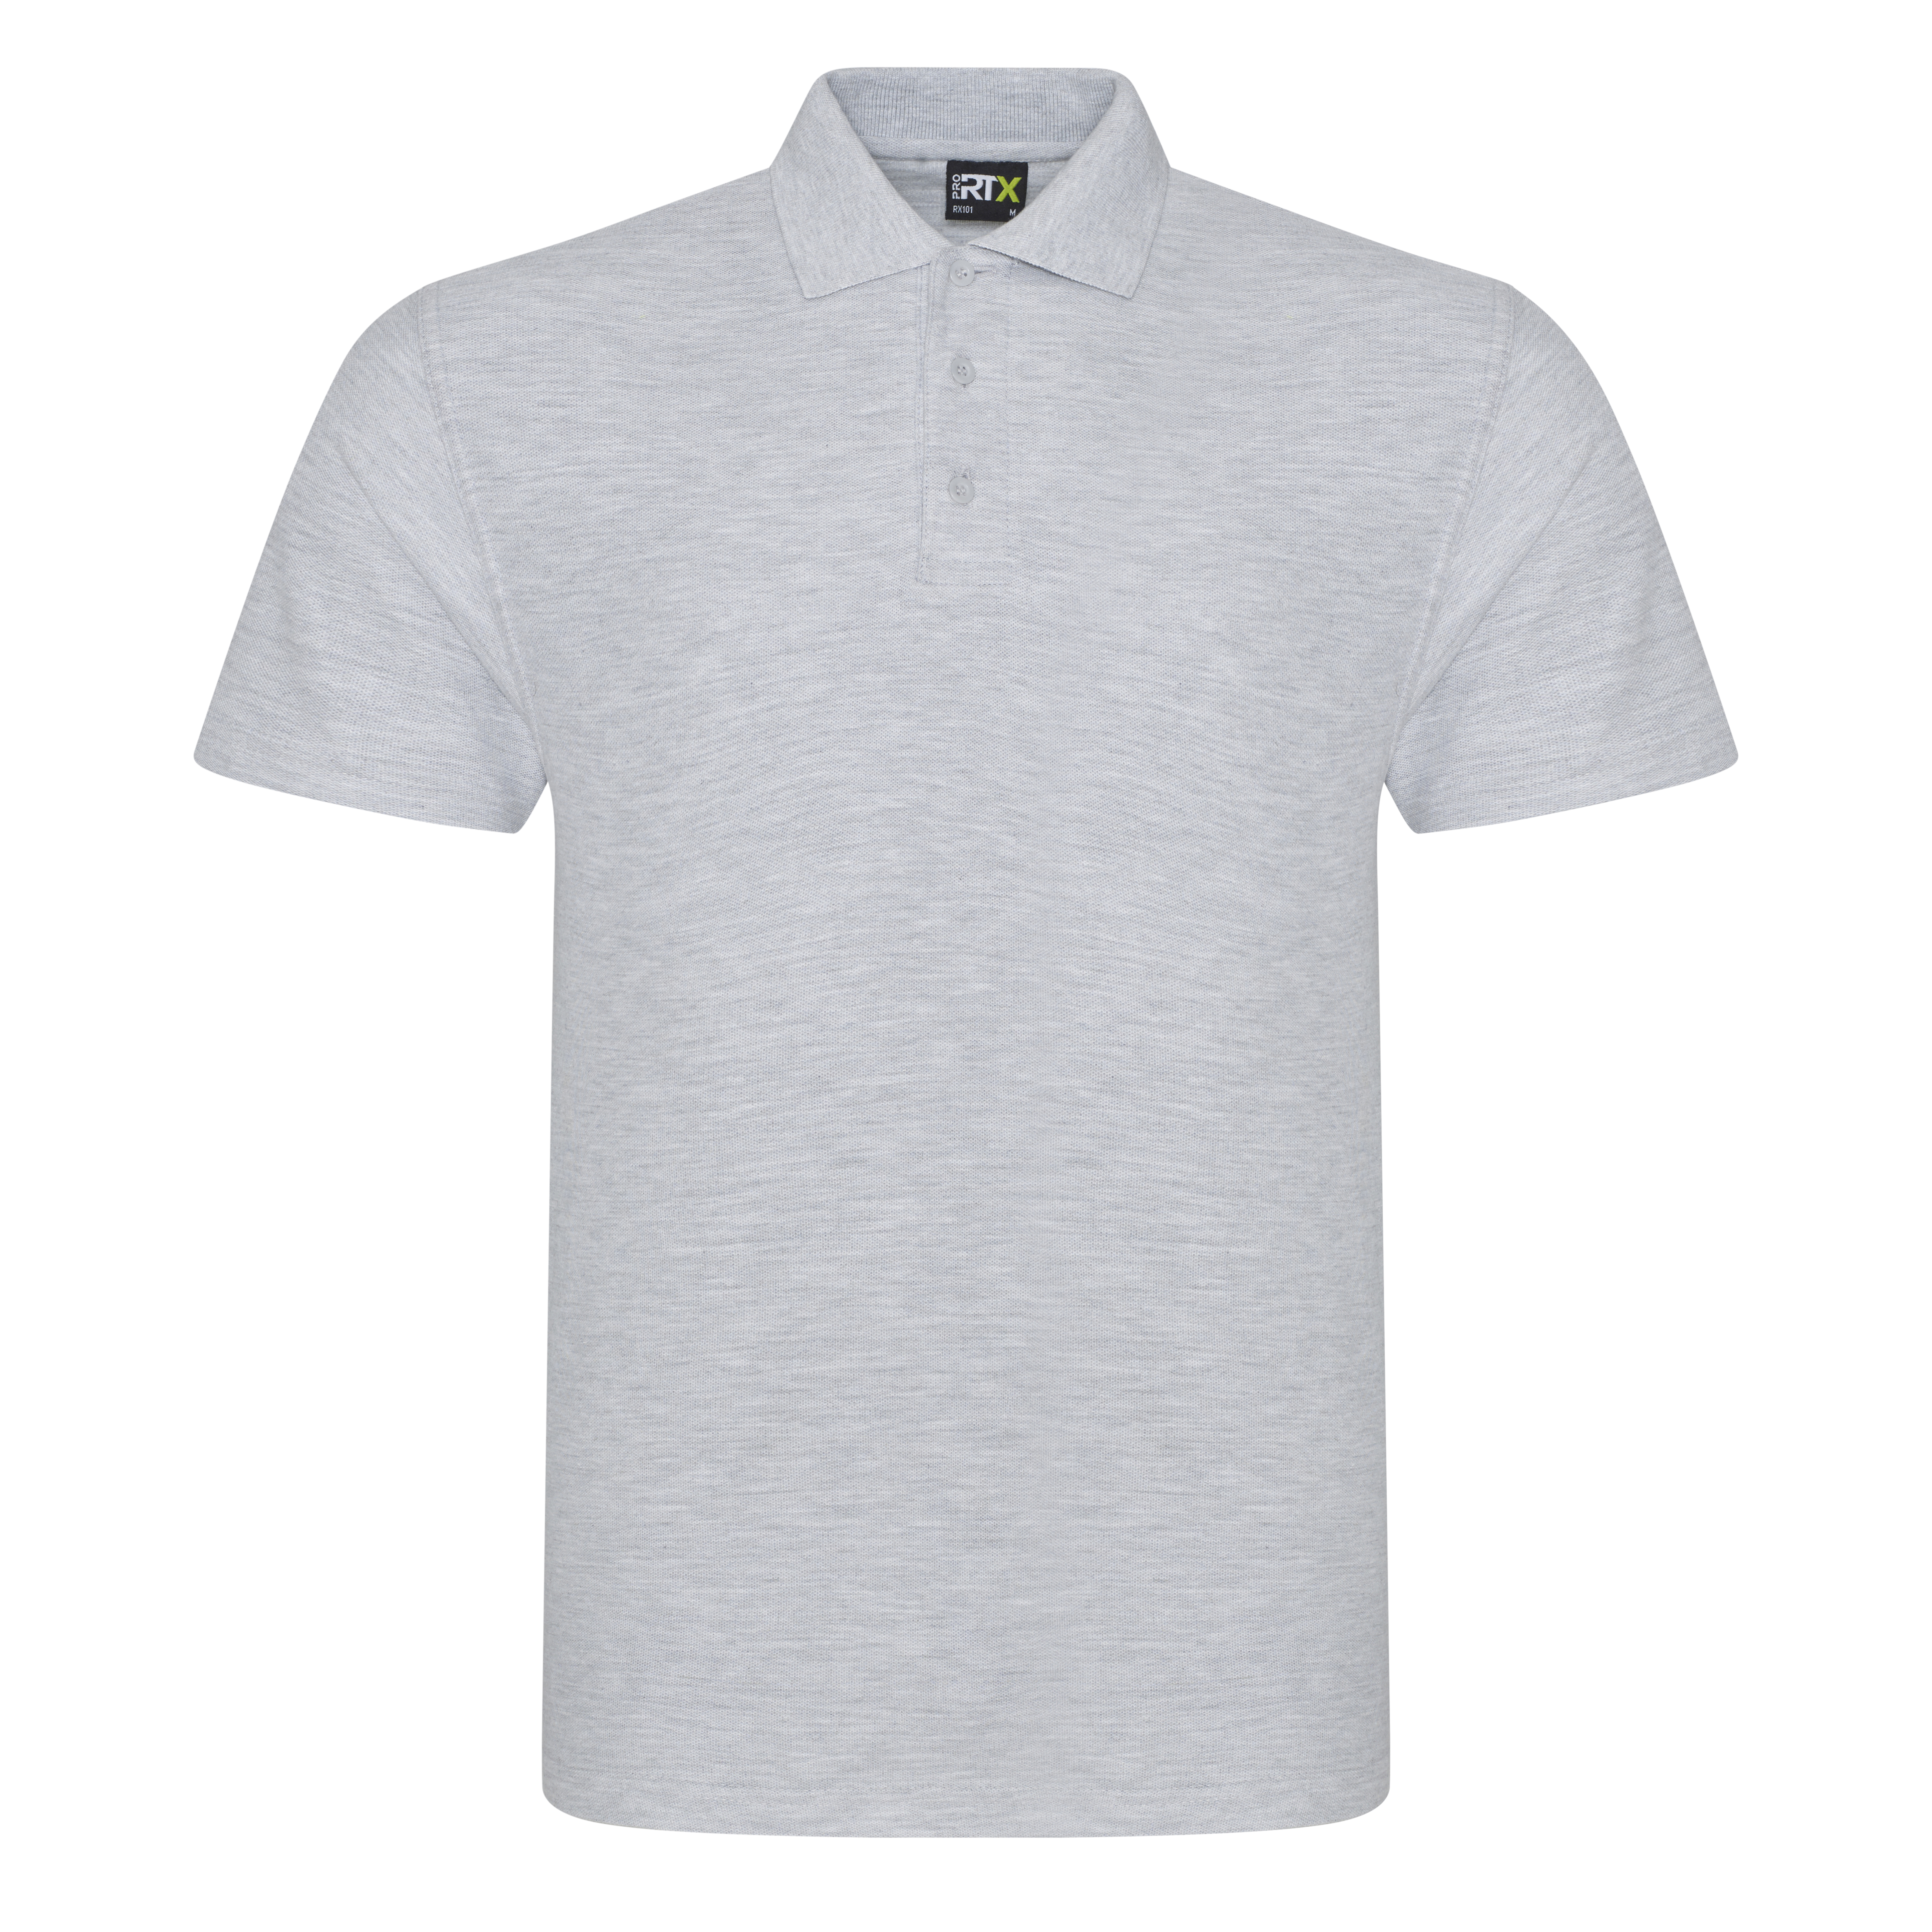 ax-httpswebsystems.s3.amazonaws.comtmp_for_downloadpro-polo-heather-grey.jpg